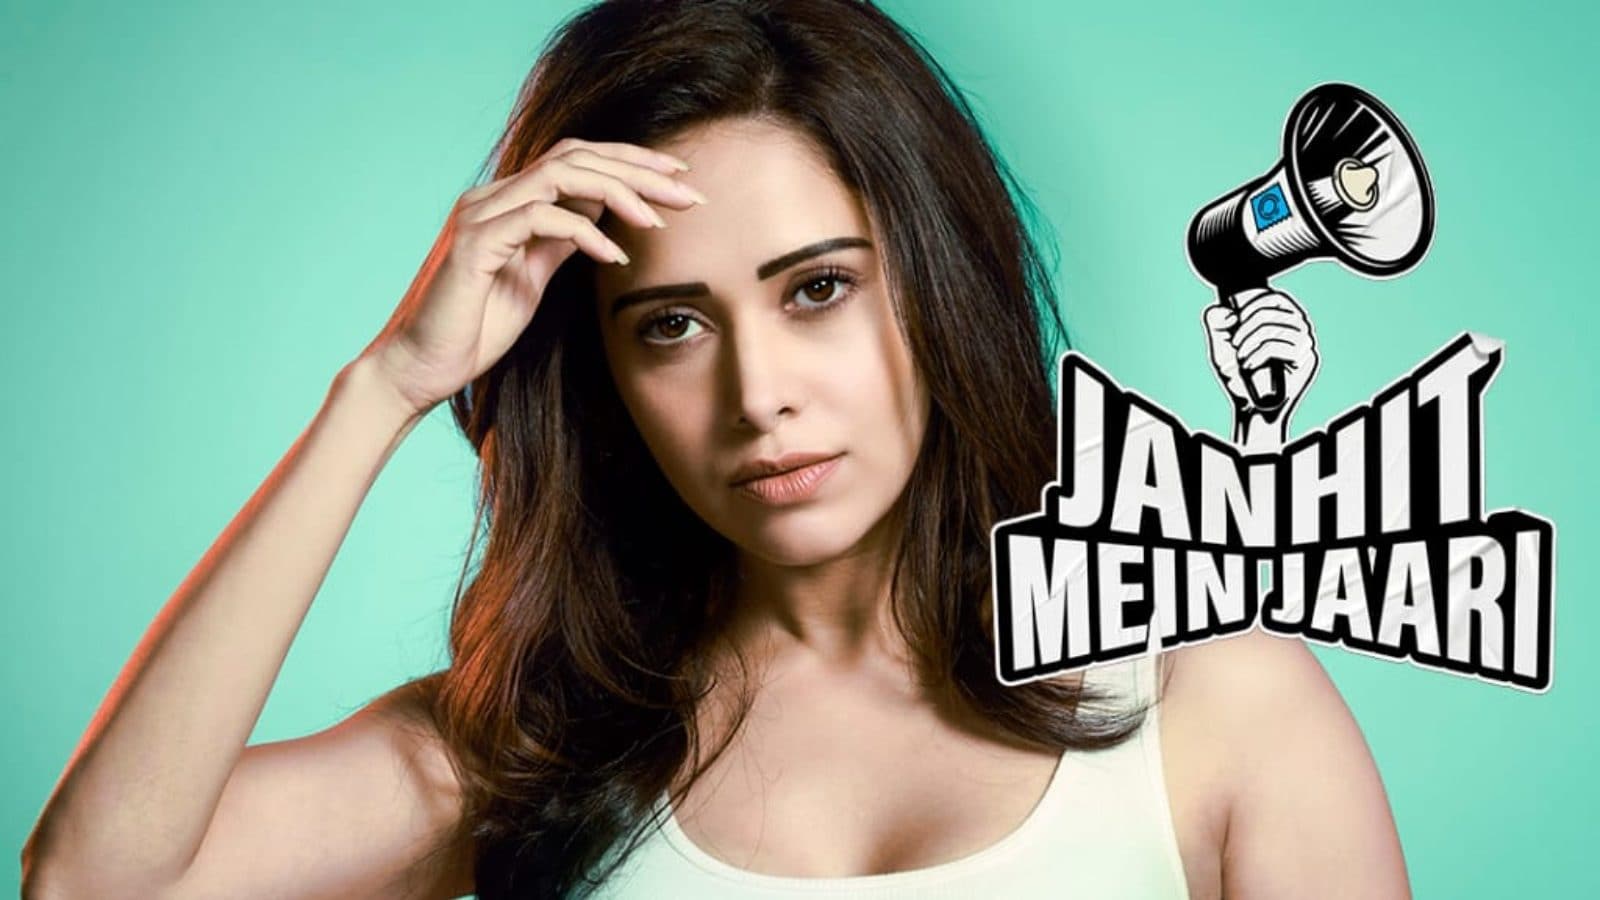 Nushrratt Bharuccha on Hitting Back at Trolls Over Janhit Mein Jaari: 'The  Comments Affected Friends, Family and That's Not Cool'